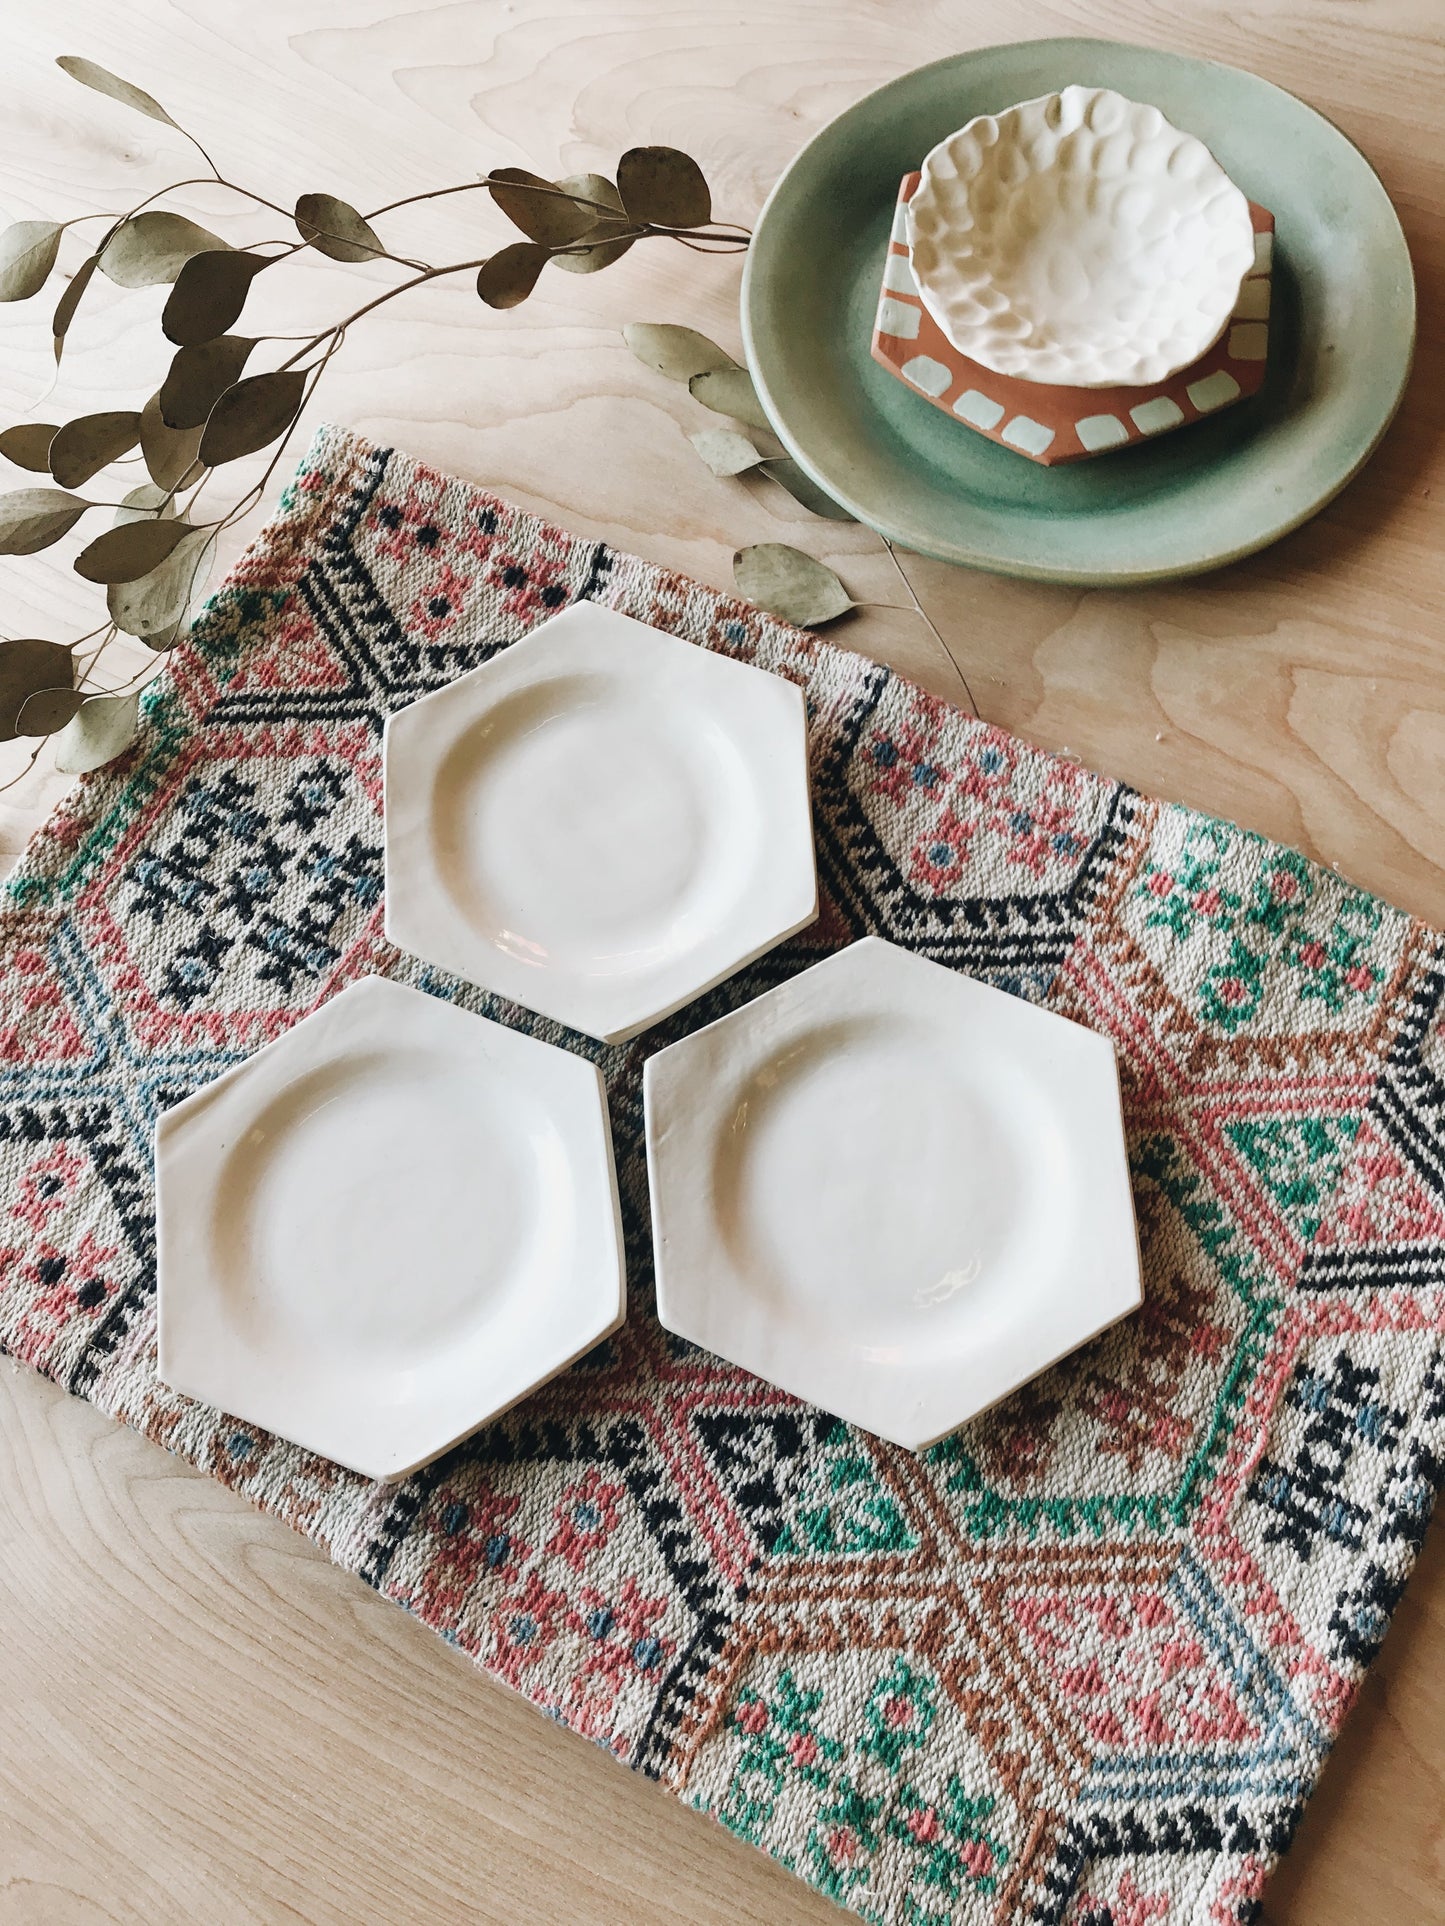 Set of three honeycomb ceramic dishes on place mat.